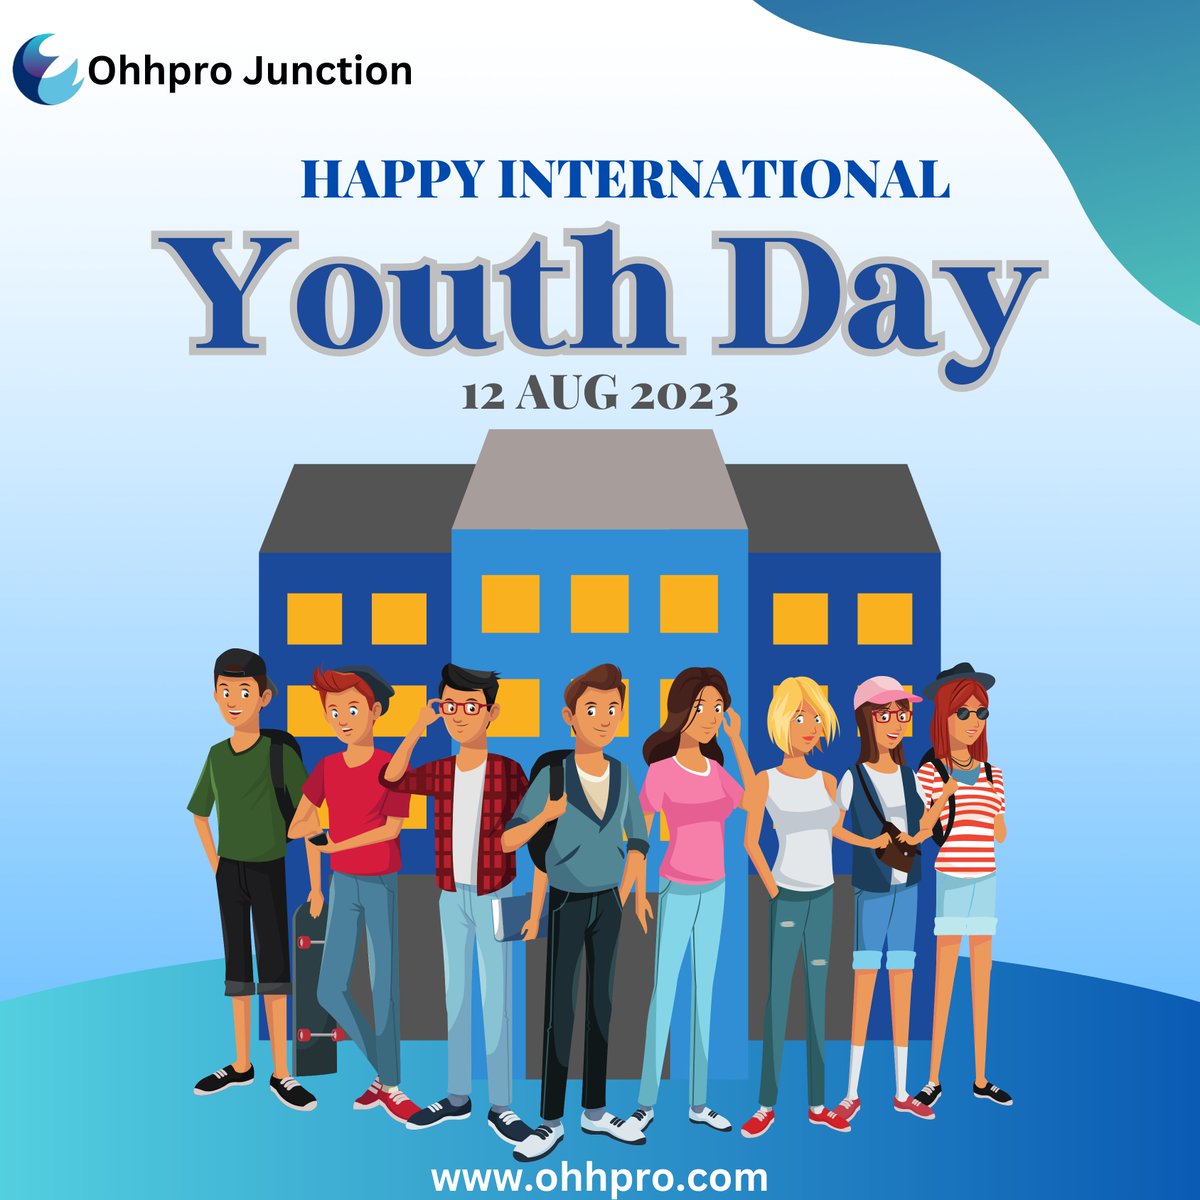 Youth Day is meant to celebrate the passion, determination, and dedication of the youth. Ohhpro family wishes all the youths a Happy Youth Day. 
#internationalyouthday #internationalevents #ohhpro #ohhprojunction #ProptechIndia #IndianRealEstate #PropTechSolutions #RealEstateTech